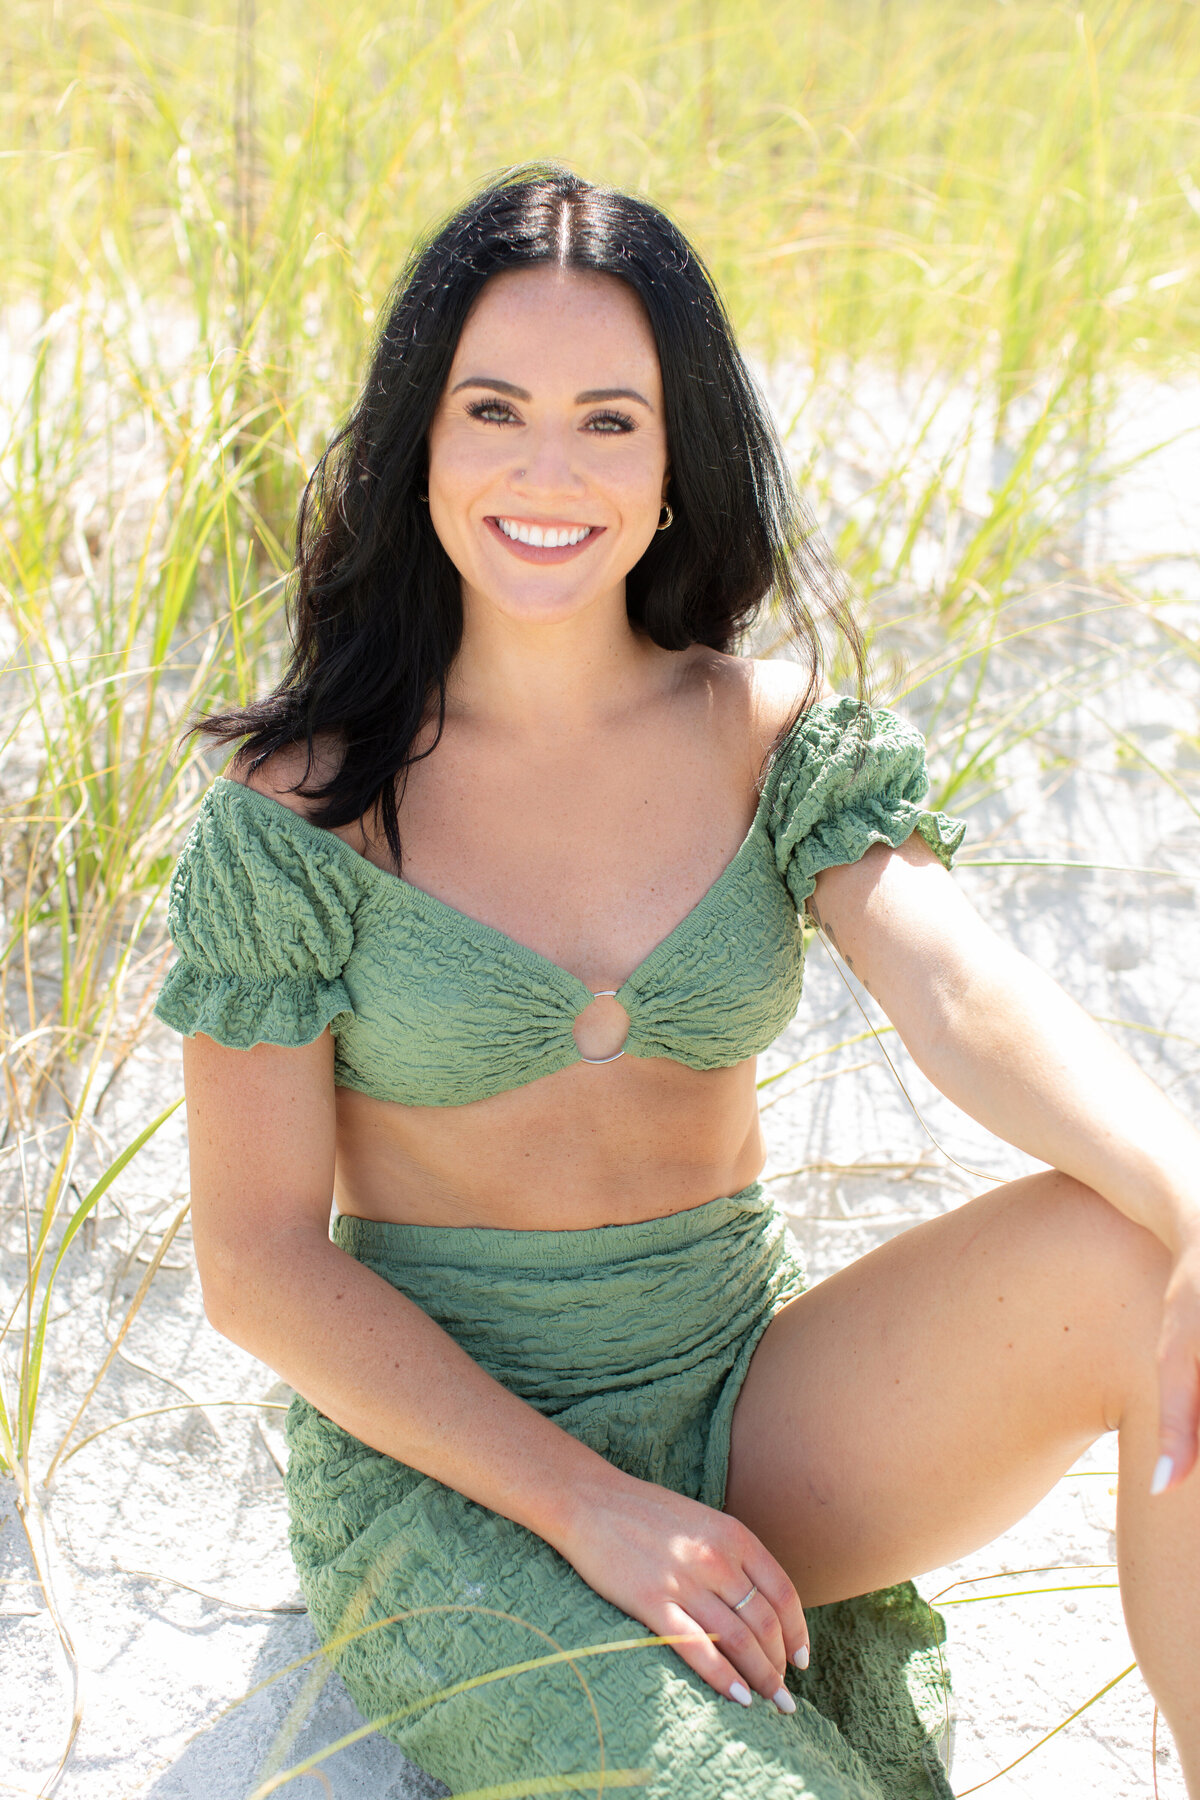 Meaghan-Health-Coach-Brand-Photography-St-Pete-31